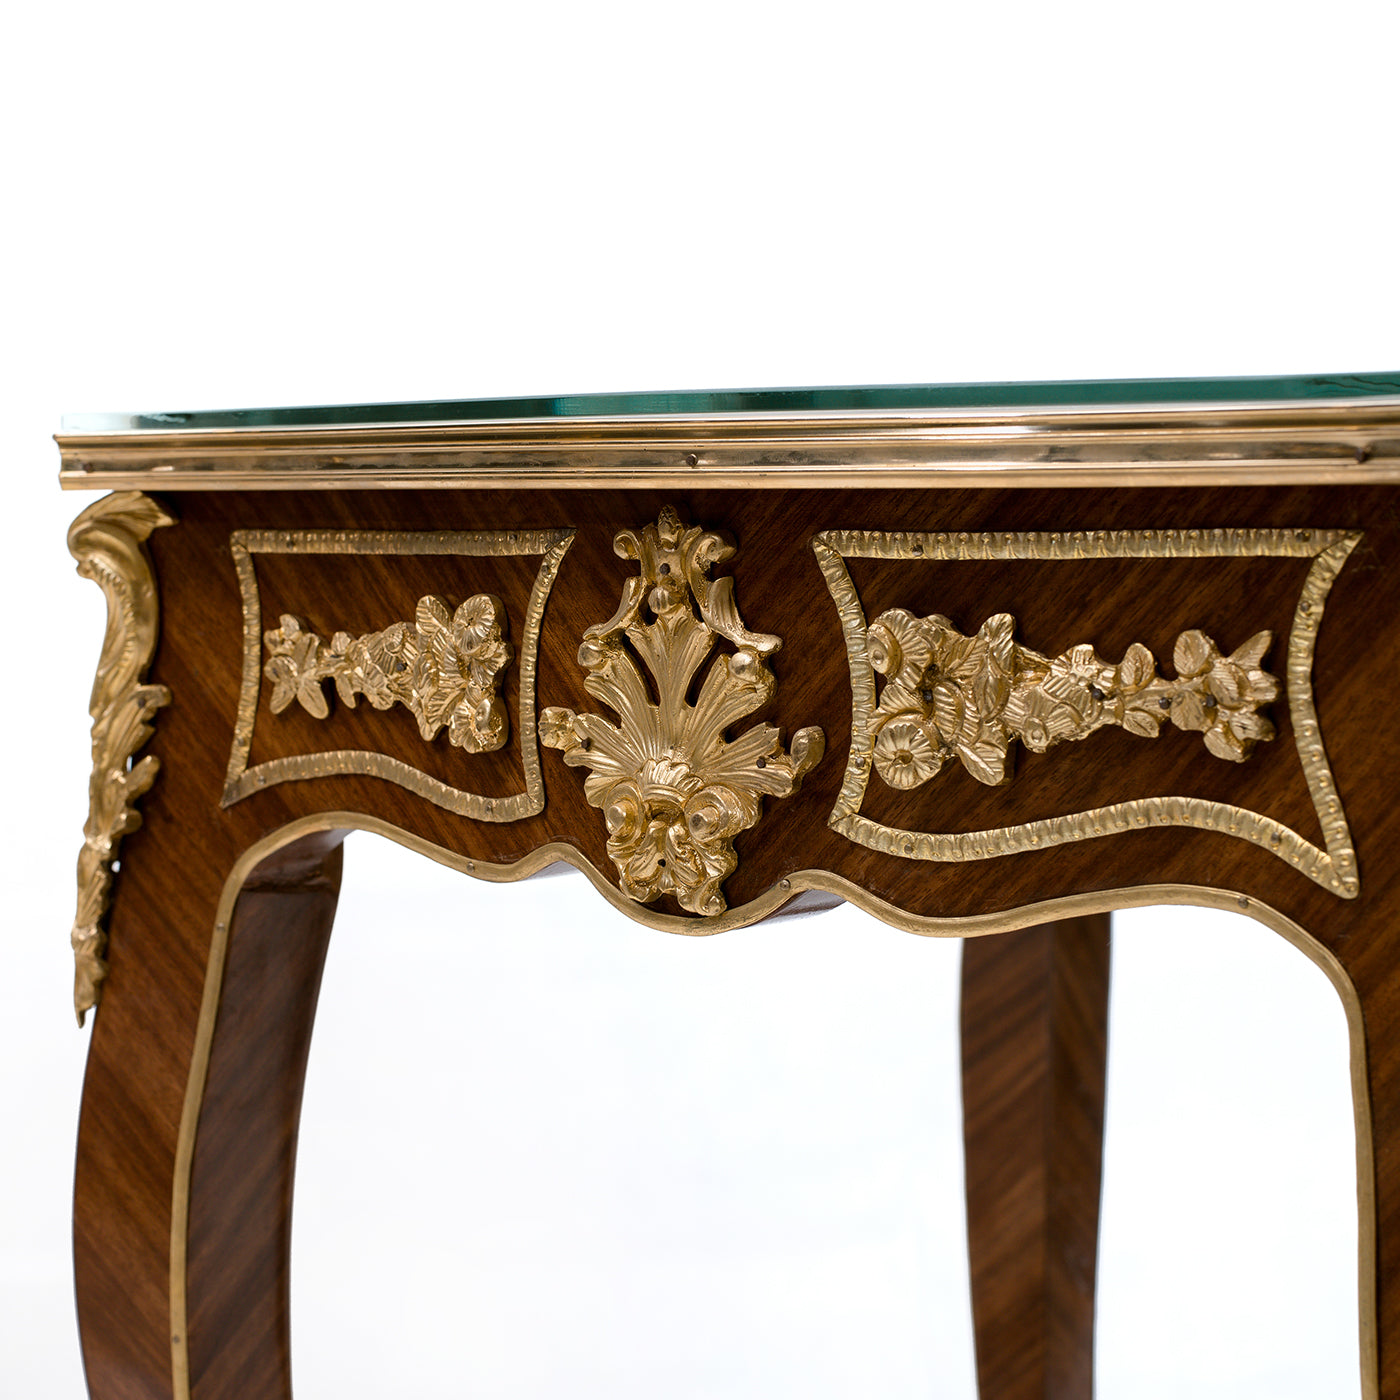 Pair of 19th century ormolu French-style side table (2 set)